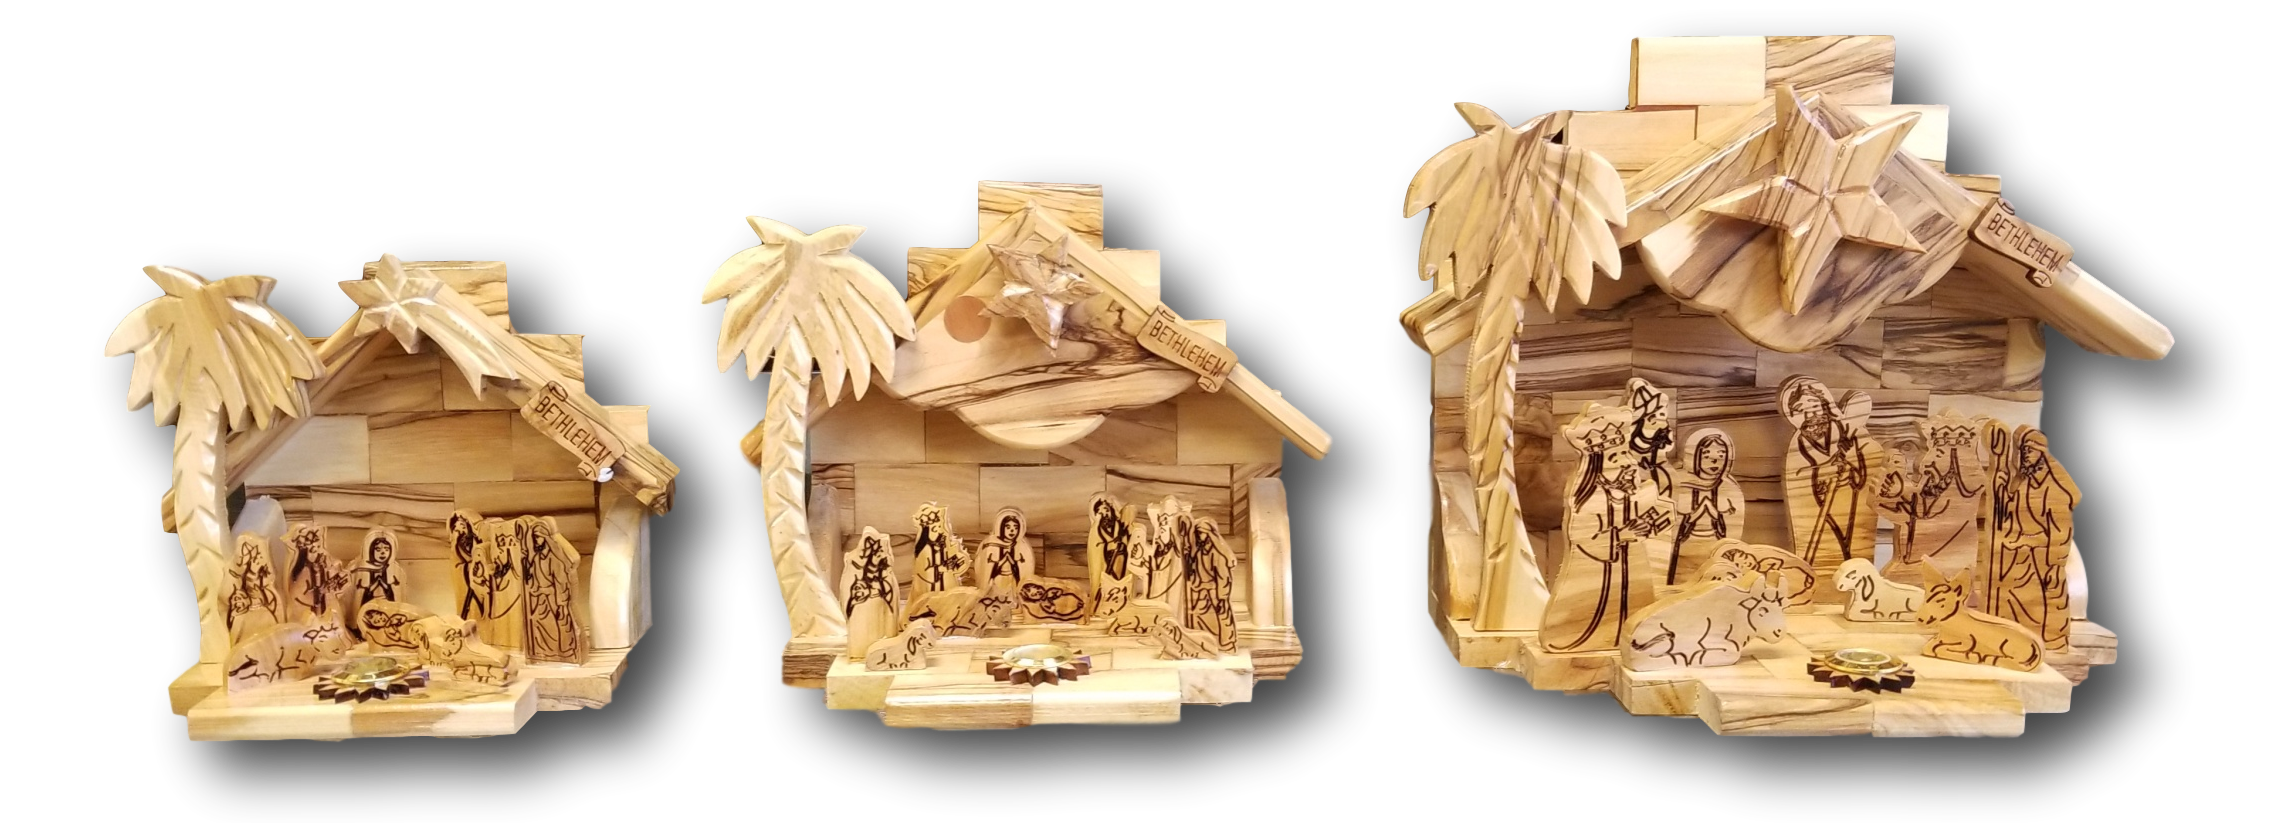 Nativity set, Musical, With incense from the tomb of Jesus, Available in different sizes